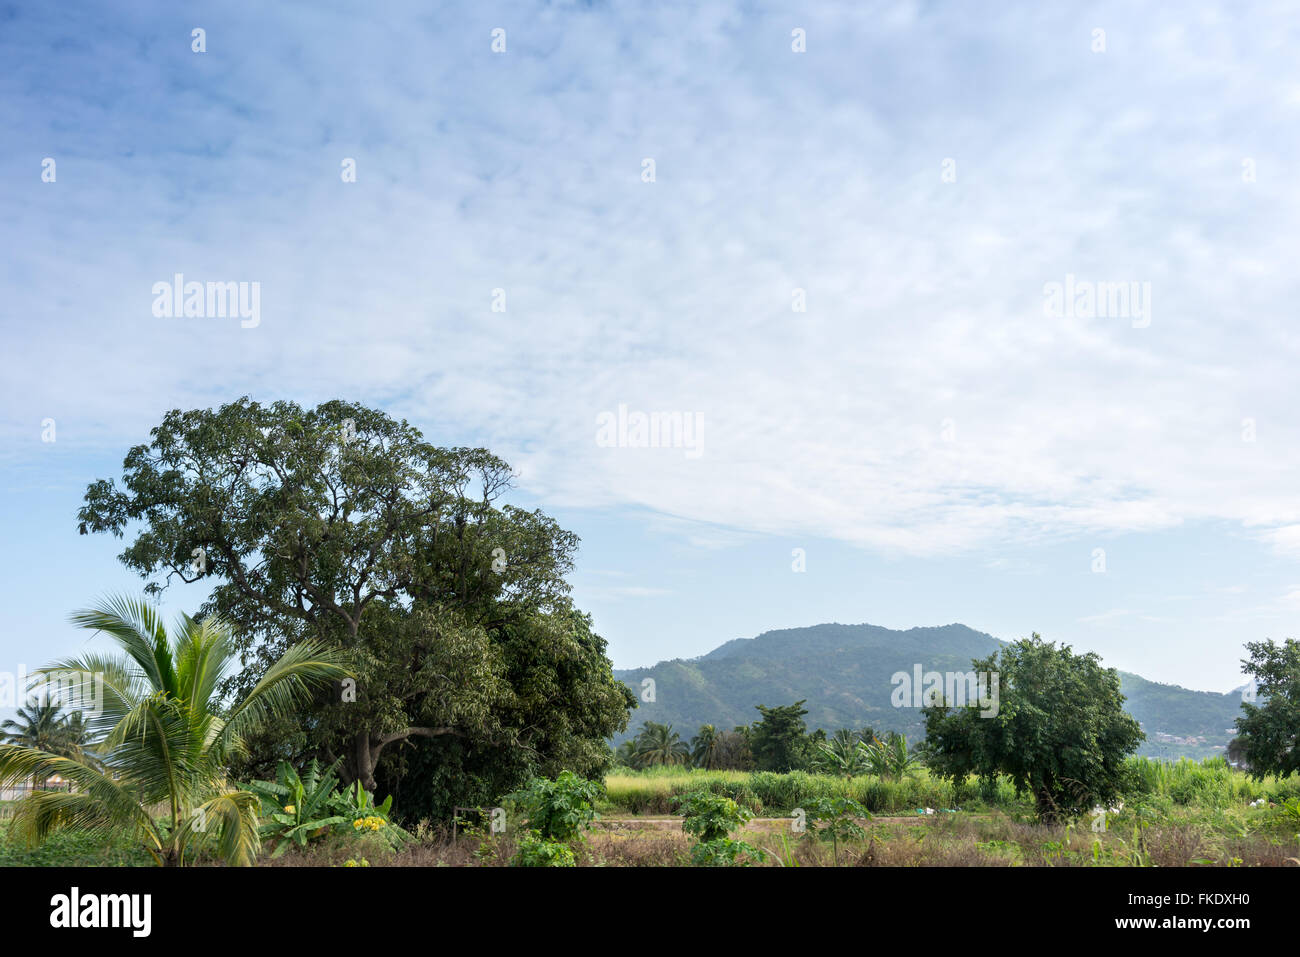 Trees in the field with mountain in background, Trinidad, Trinidad And Tobago Stock Photo